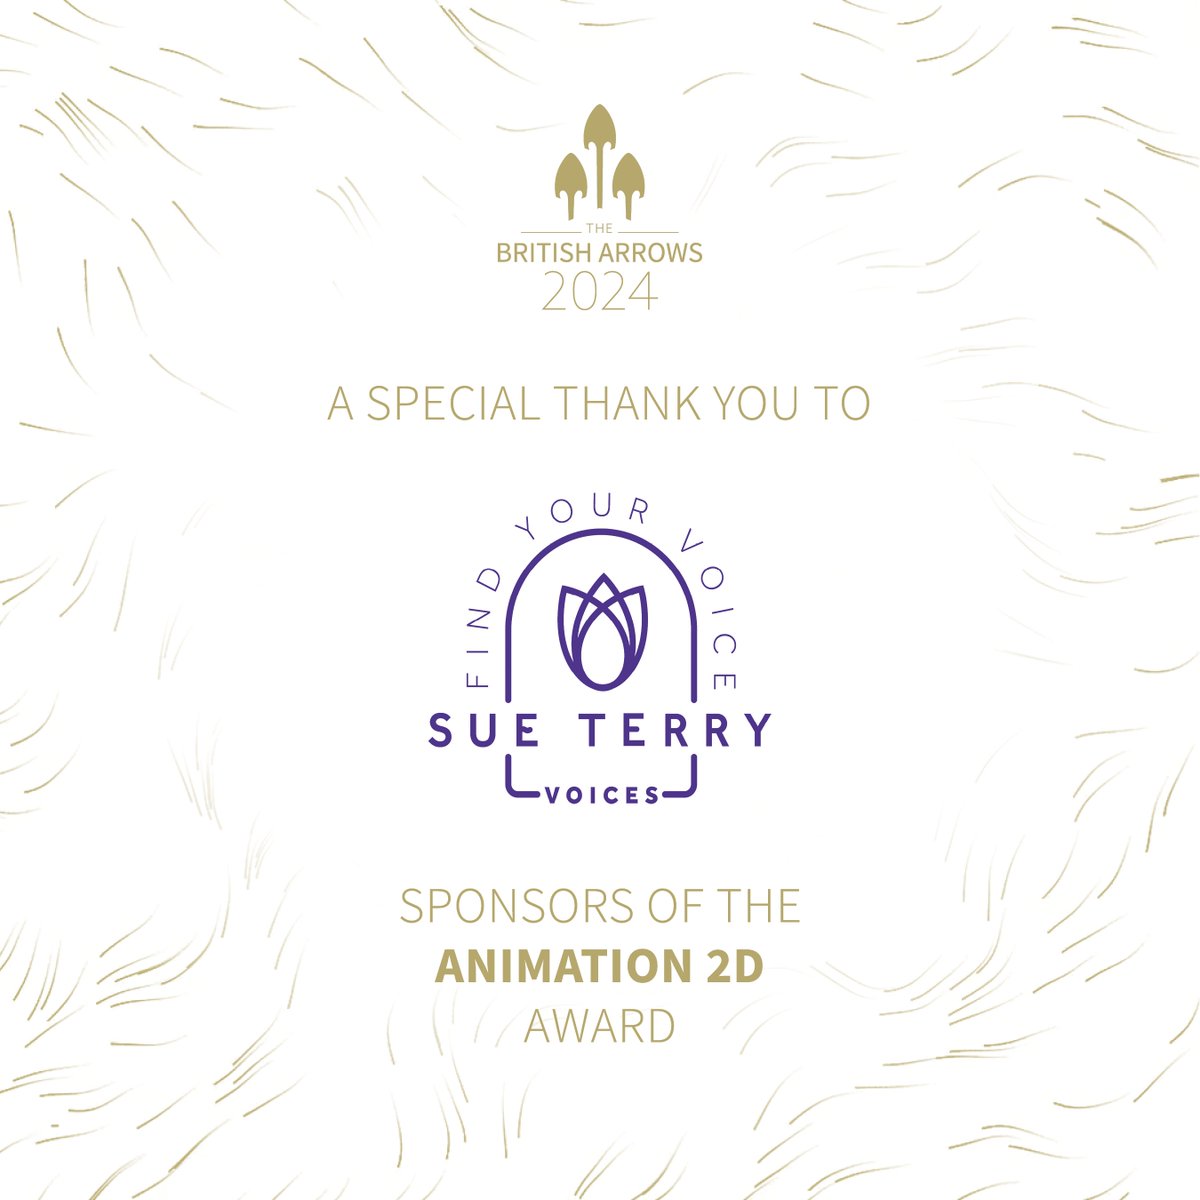 A special thank you to Sue Terry Voices Sponsors of the Animation 2D Award #BA23 #BA23 #BritishArrows #advertising #award #celebration